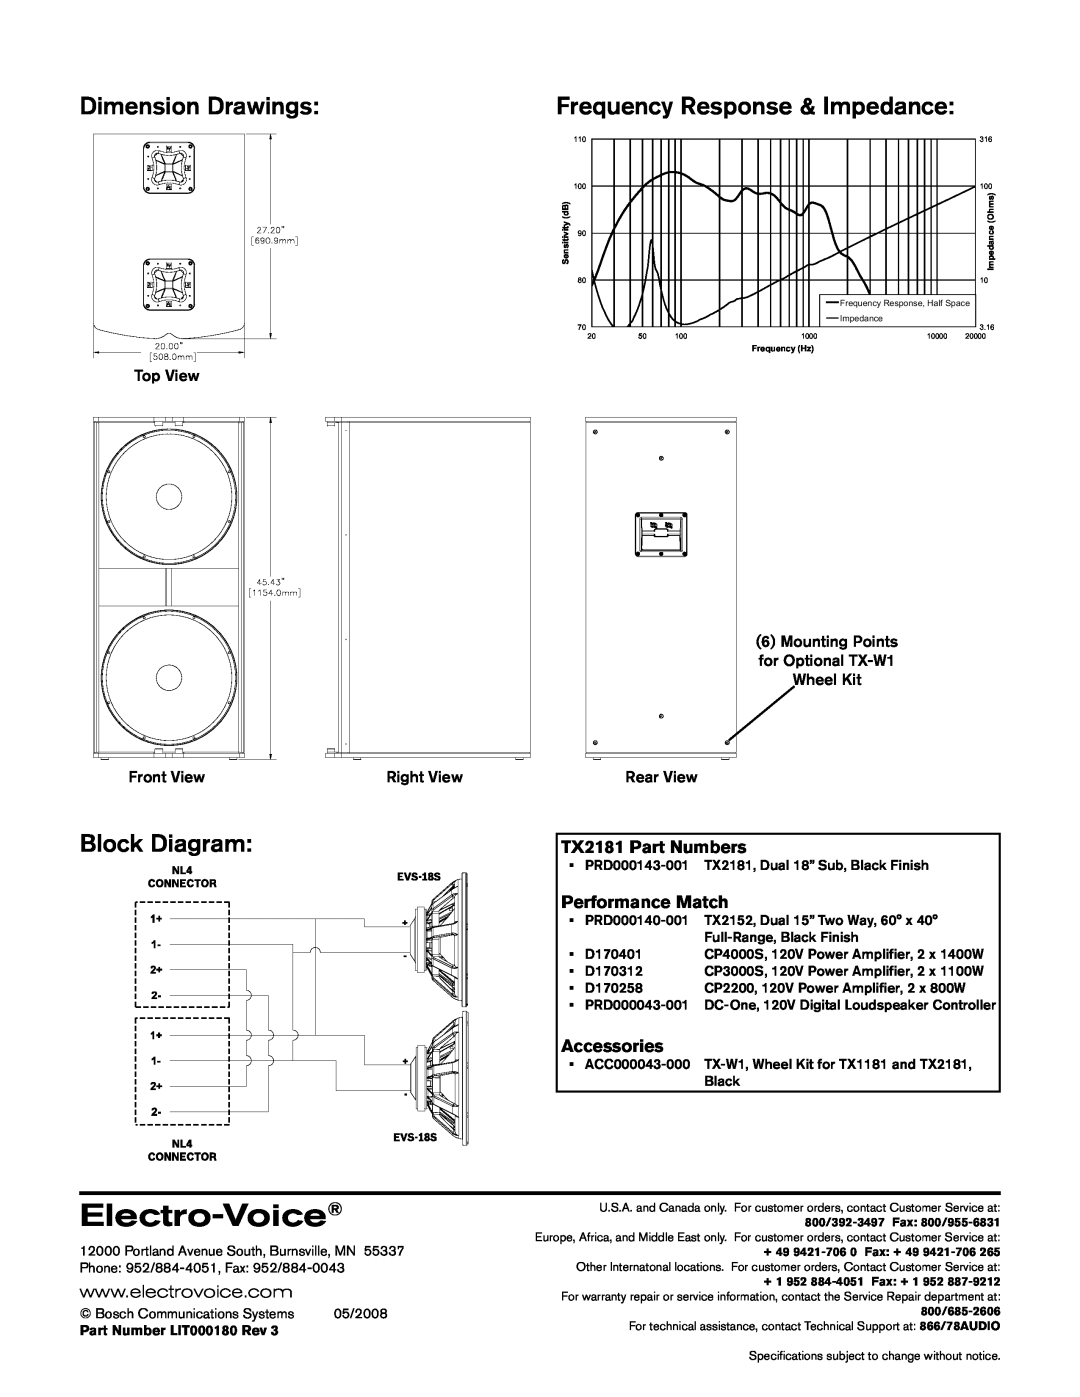 Electro-Voice Dimension Drawings, Frequency Response & Impedance, Block Diagram, Electro-Voice, TX2181 Part Numbers 